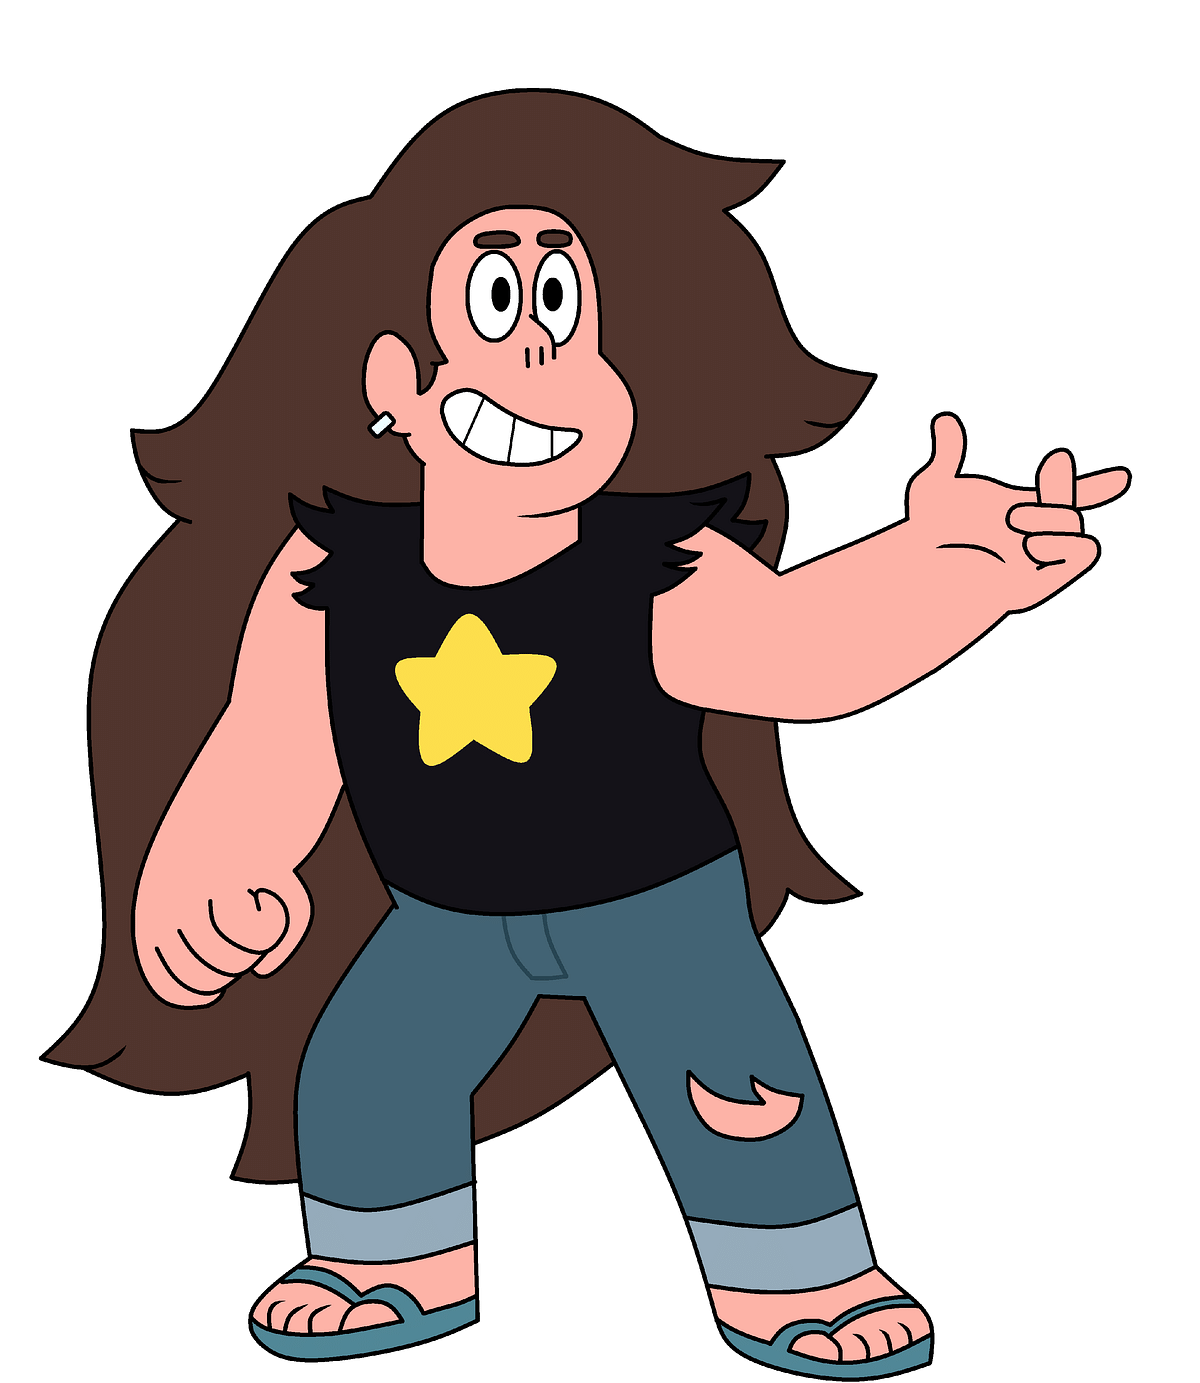 Young Greg Universe costume